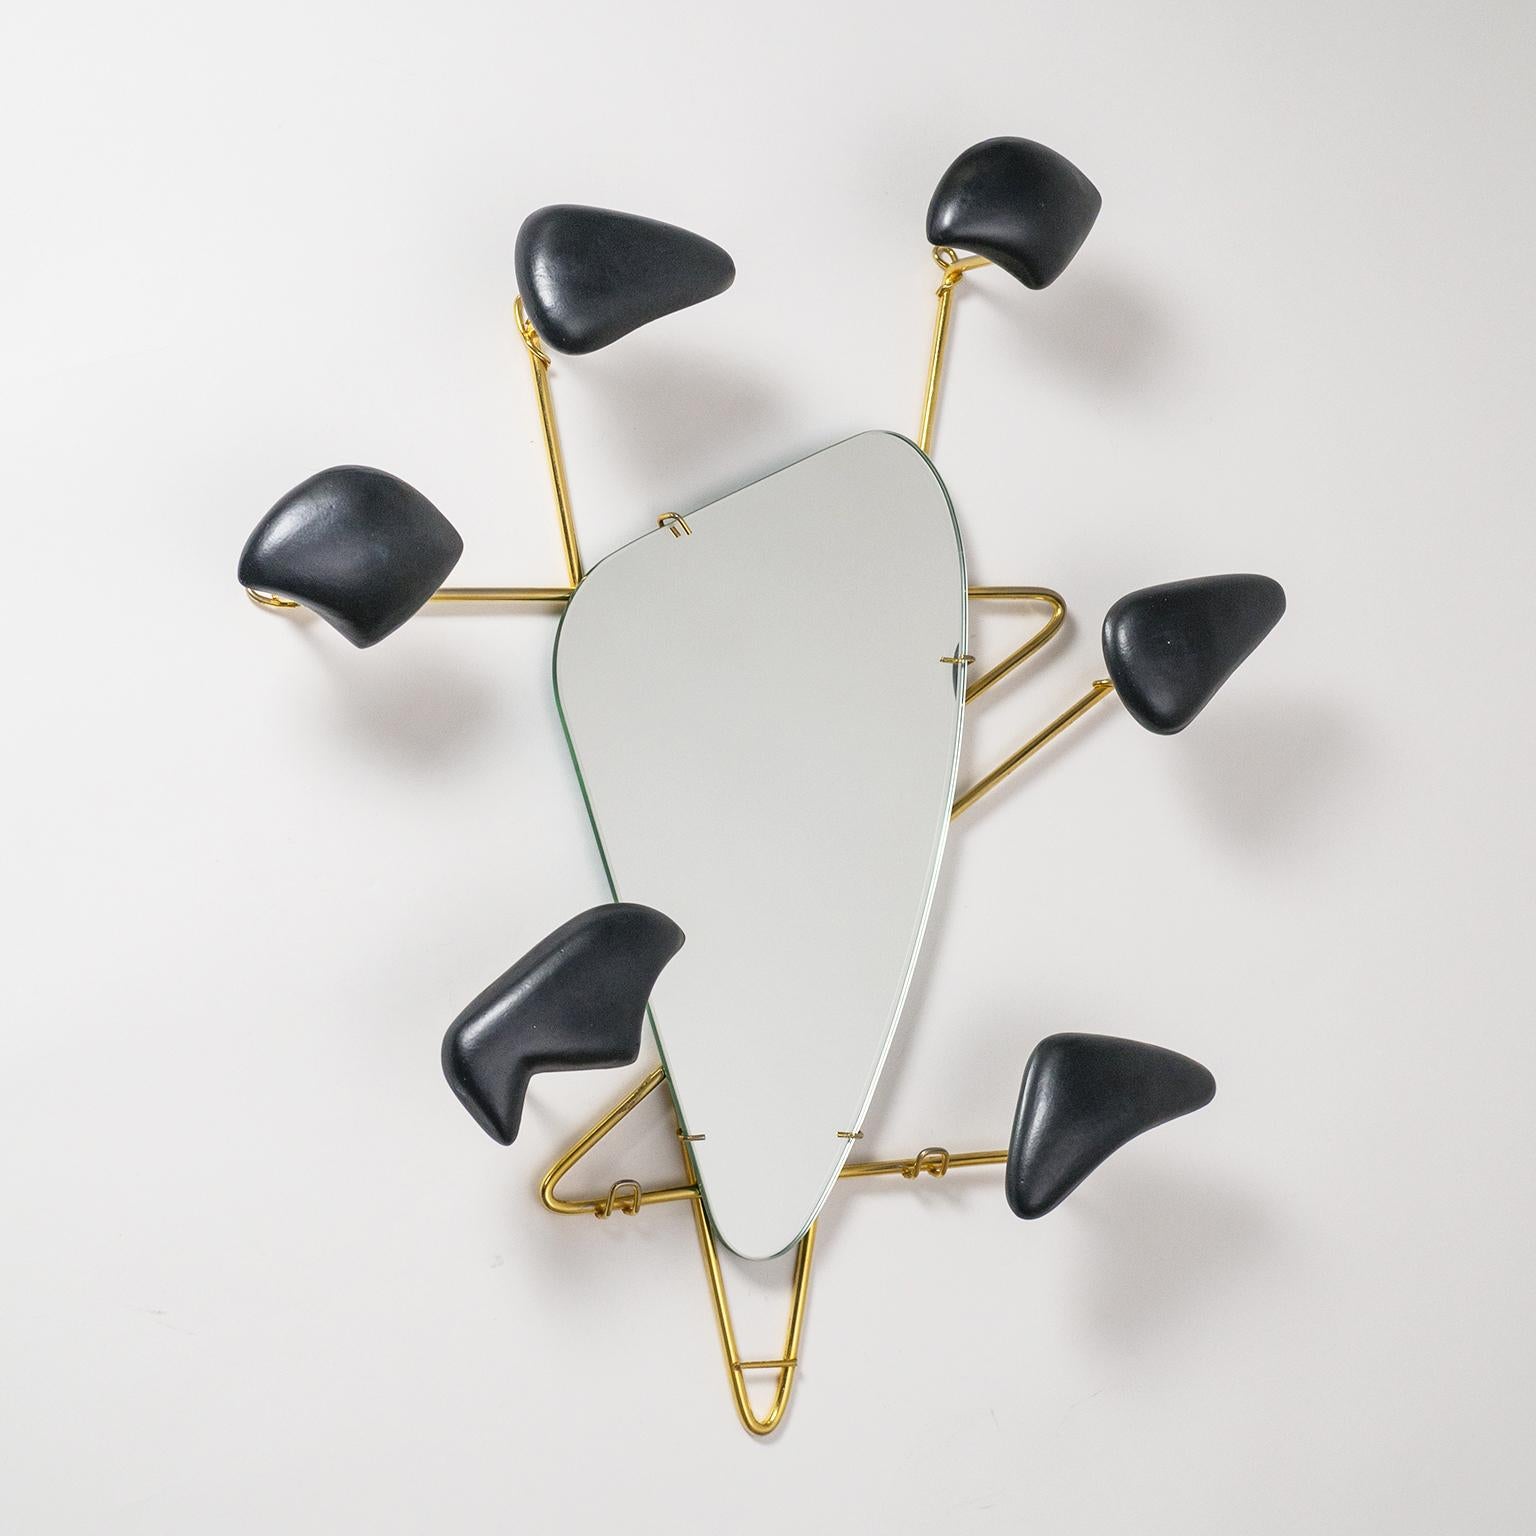 Stunning sculptural mirror by Georges Jouvé for Marcel Asselbur. Rare six arm version, each with an abstract Jouvé ceramic form which can support a hat or coat. 